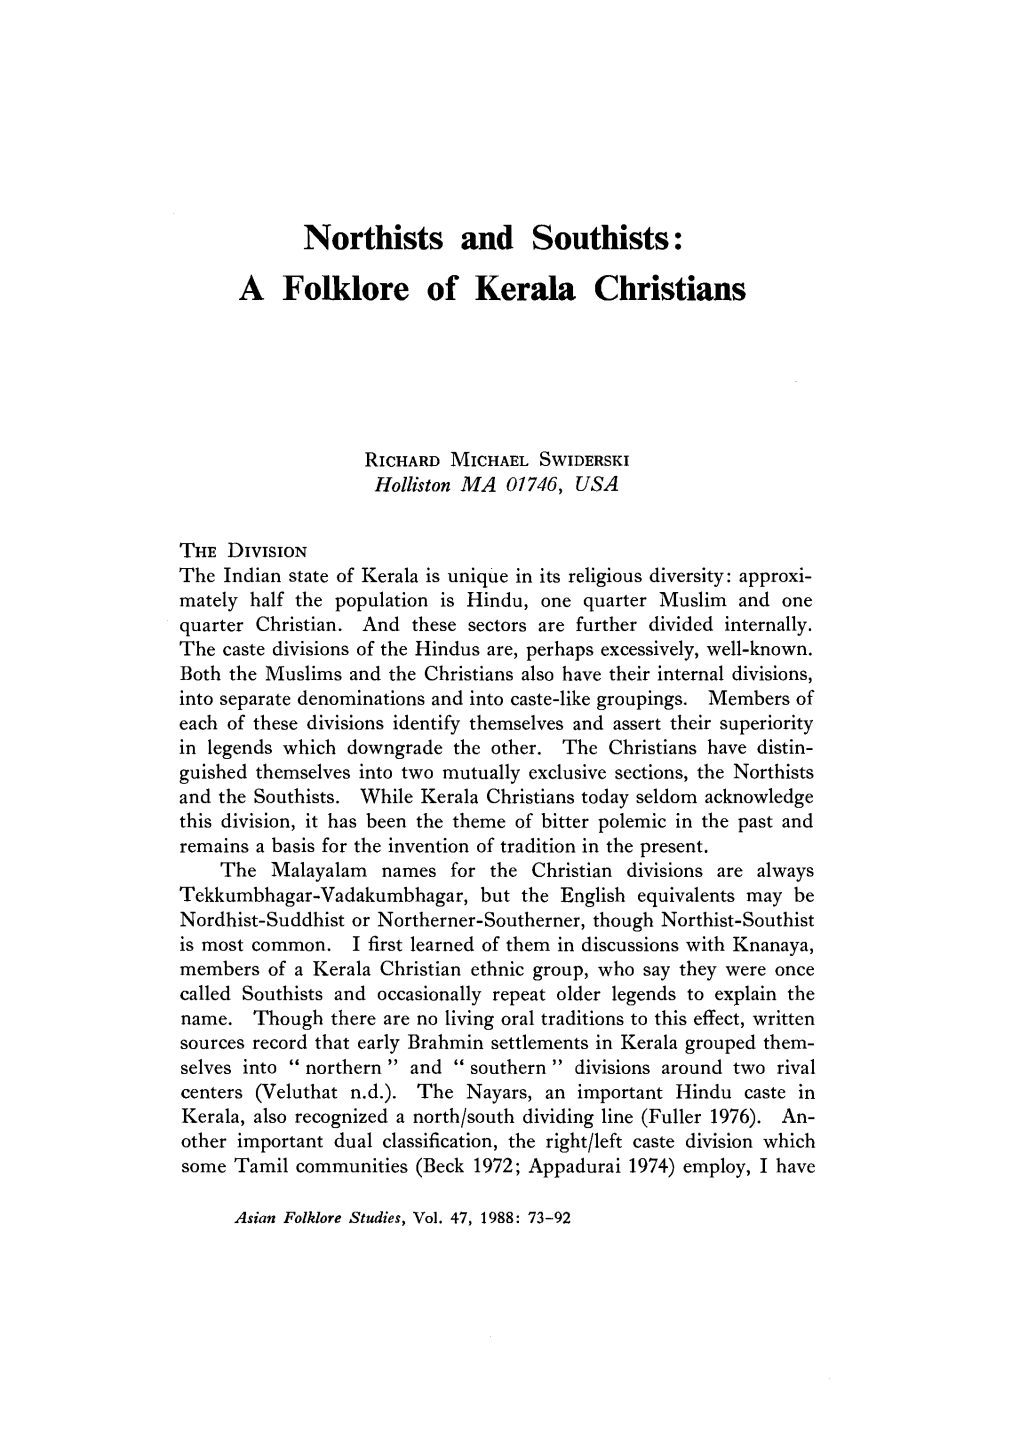 Northists and Southists: a Folklore of Kerala Christians